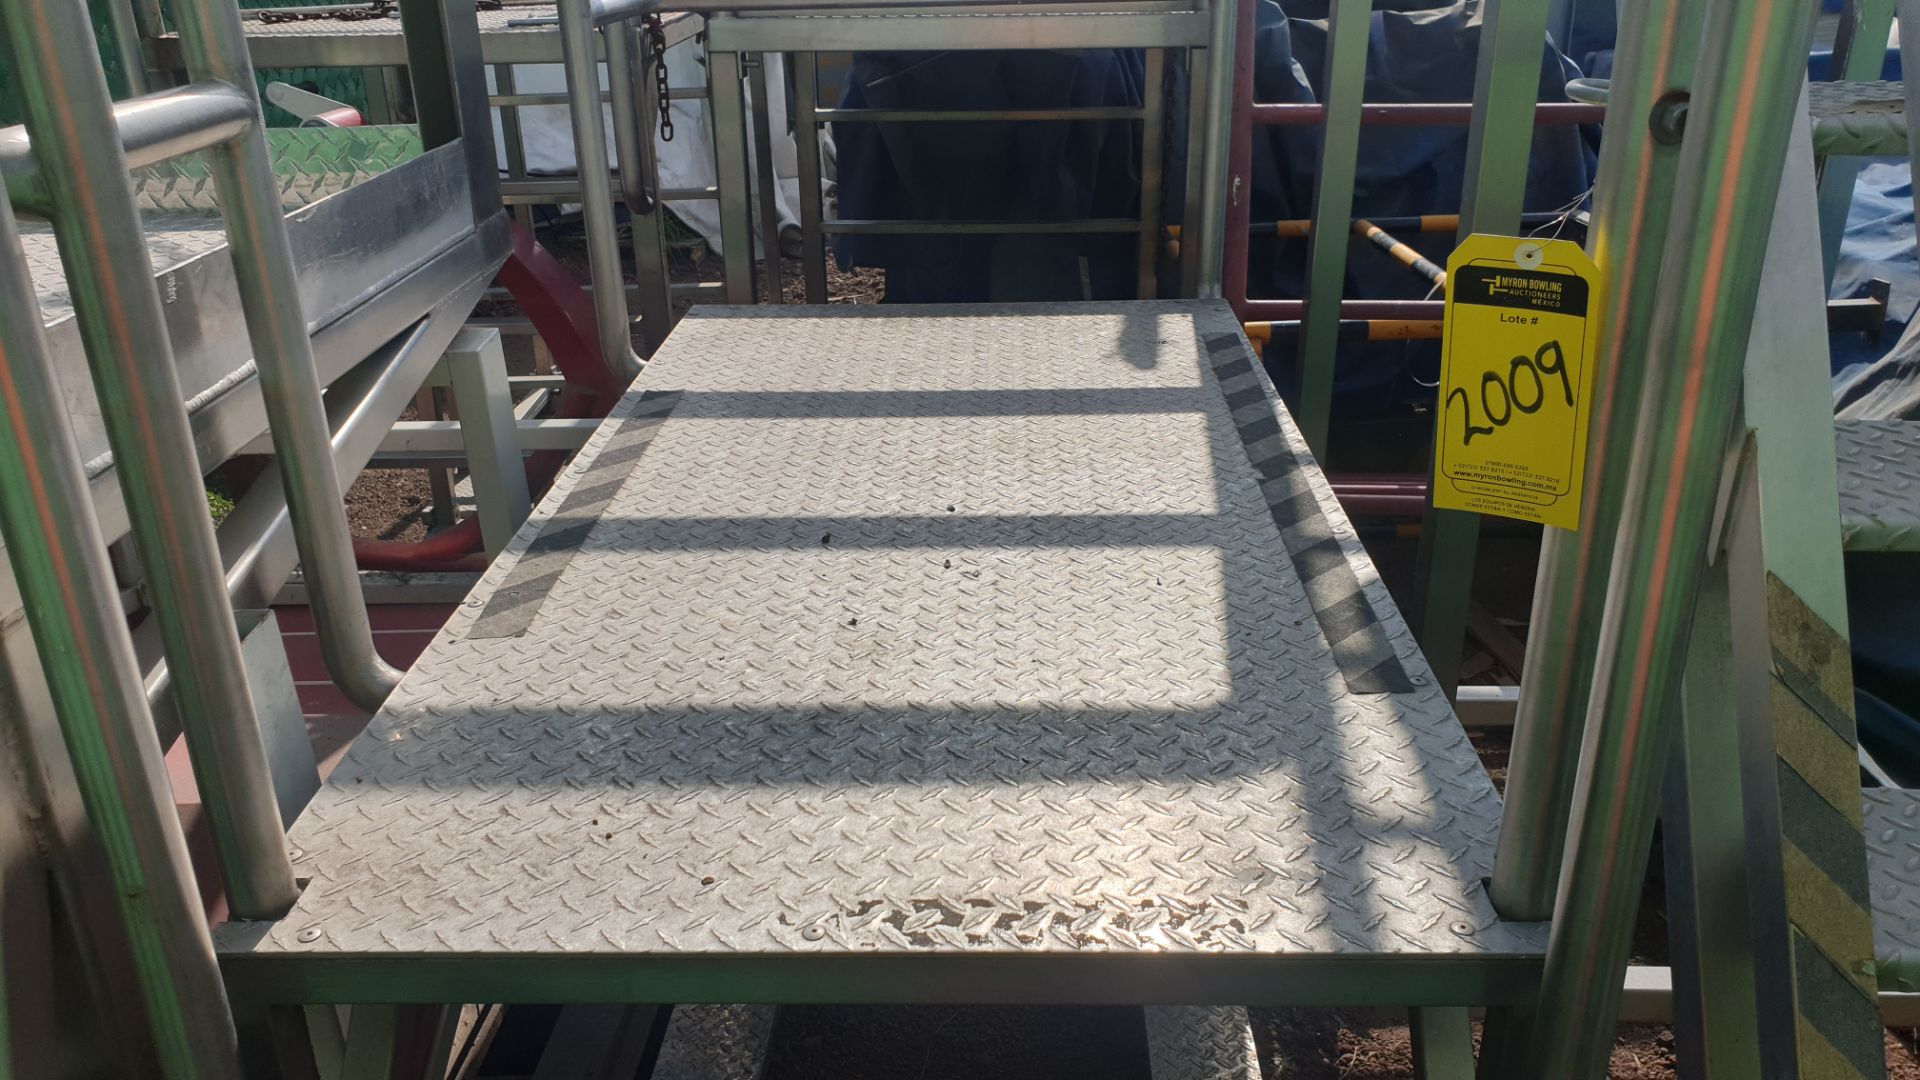 1 vertical platform of staineless steel with anti-slip, measures 1.60 x .85 x 1.00